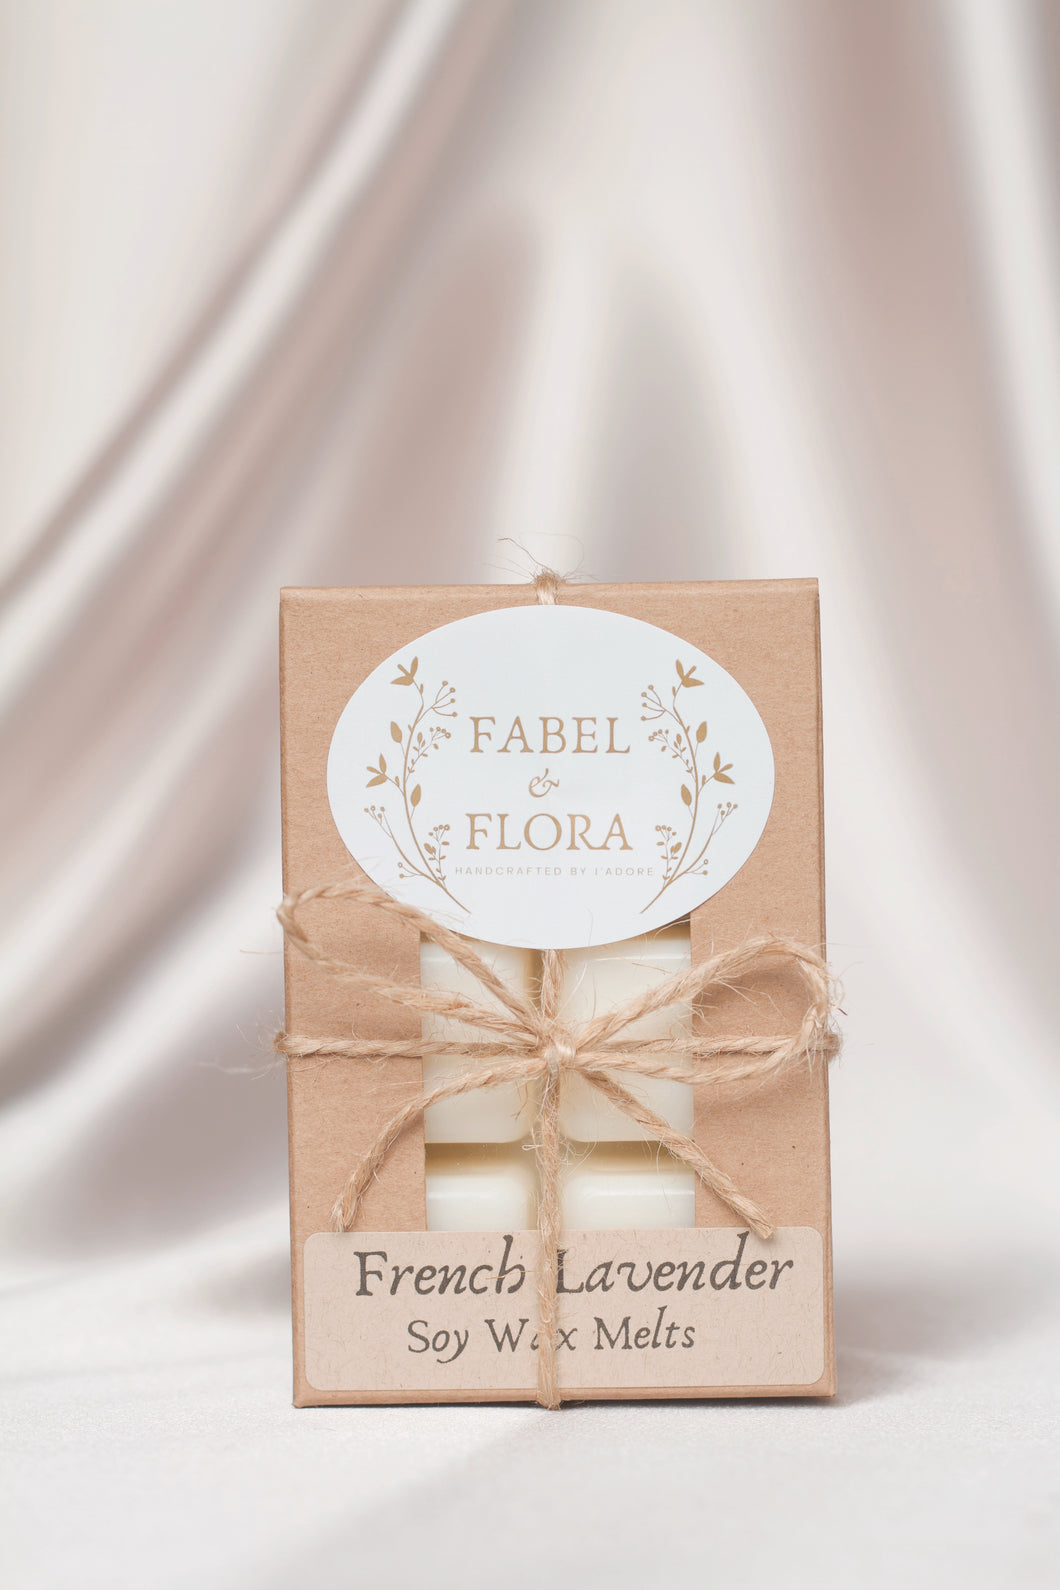 French Lavender Soy Wax Melt